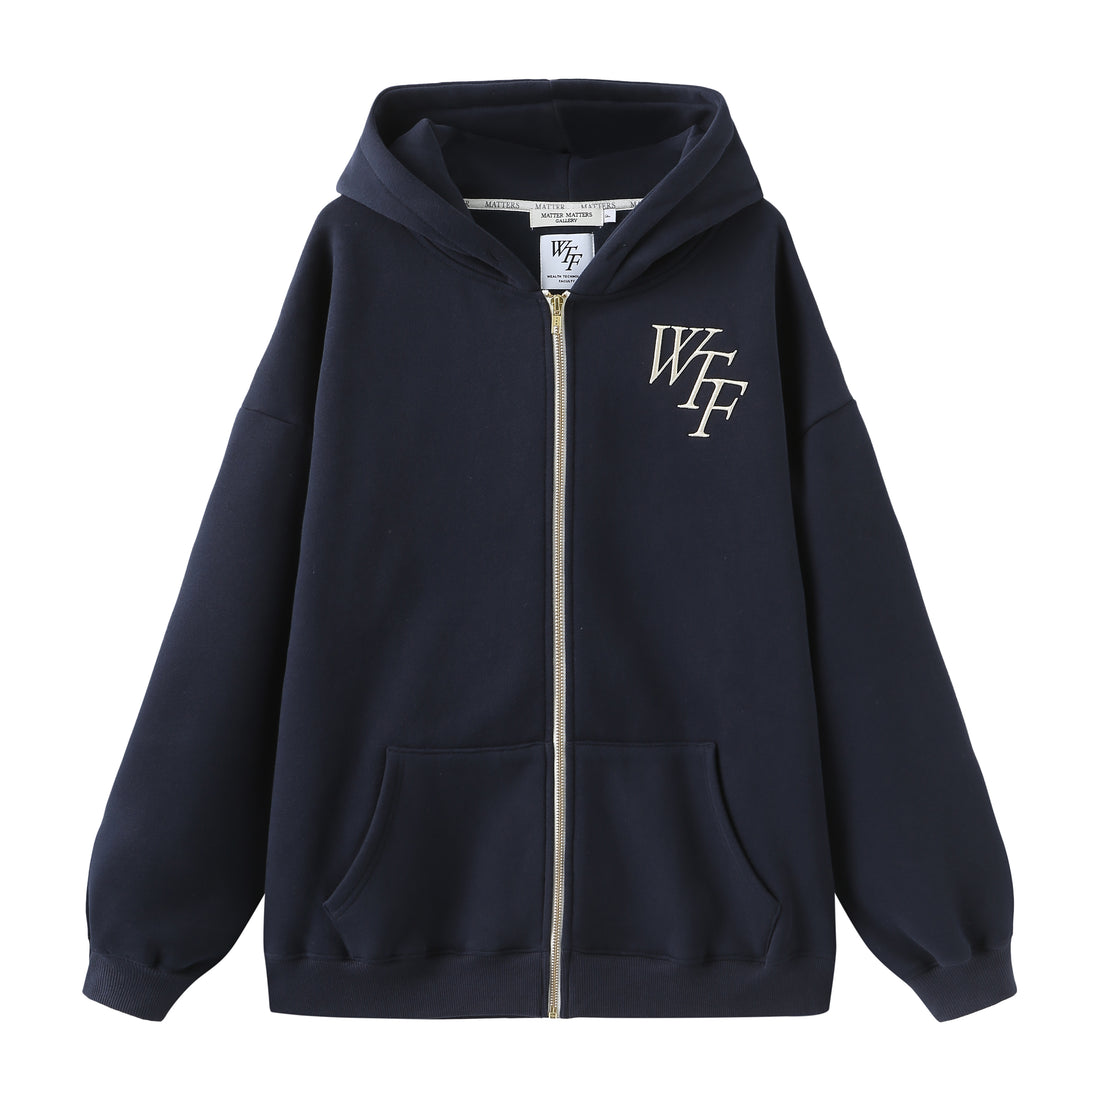 Wealth Technology Faculty / Oversized Hoodies